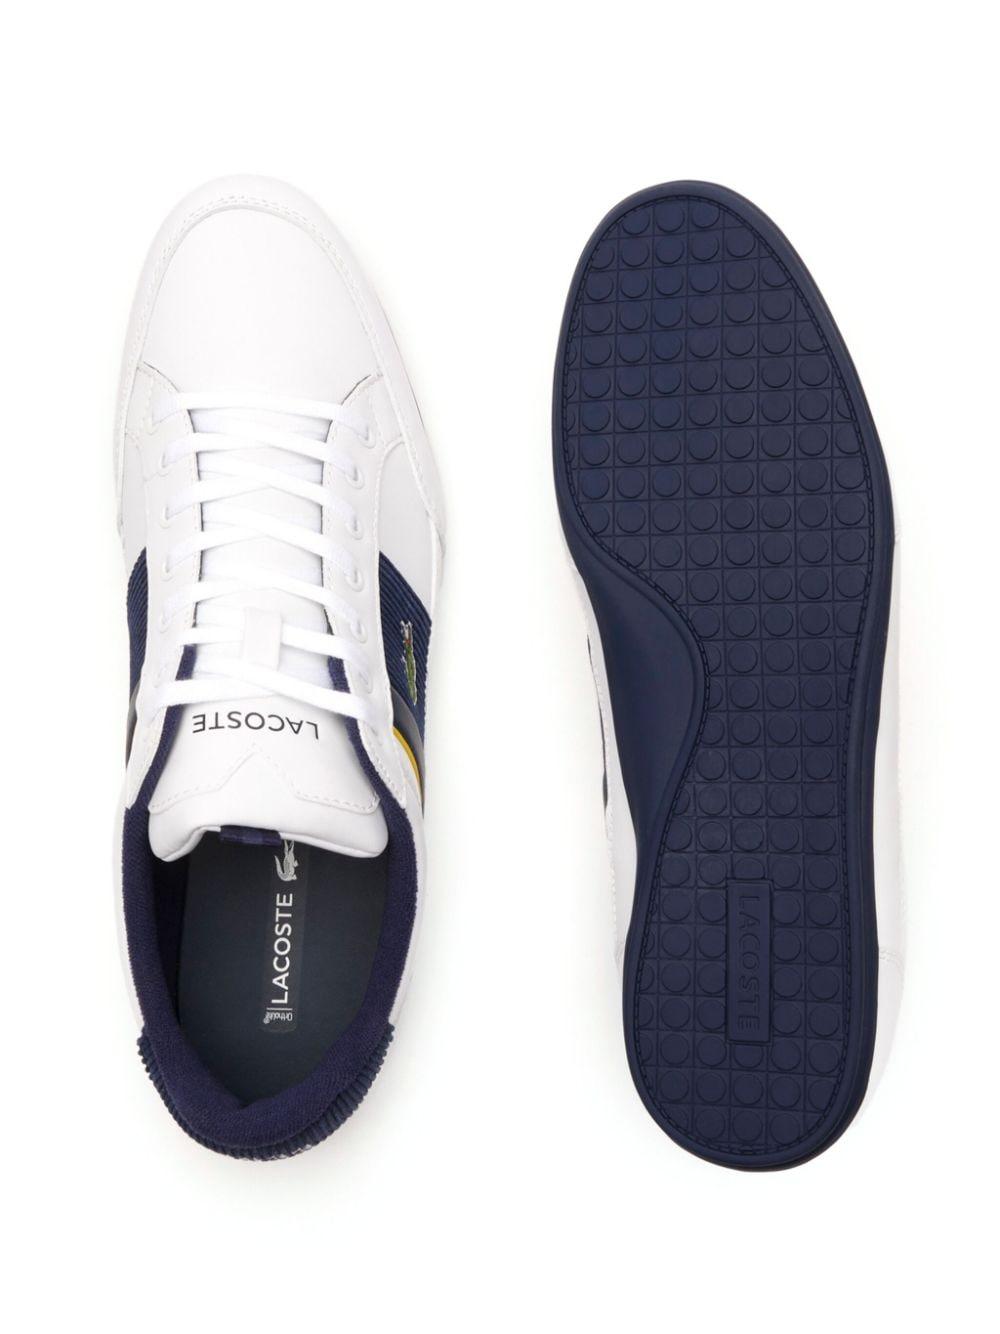 Lacoste Chaymon Corduroy-detail Leather Sneakers in White for Men | Lyst